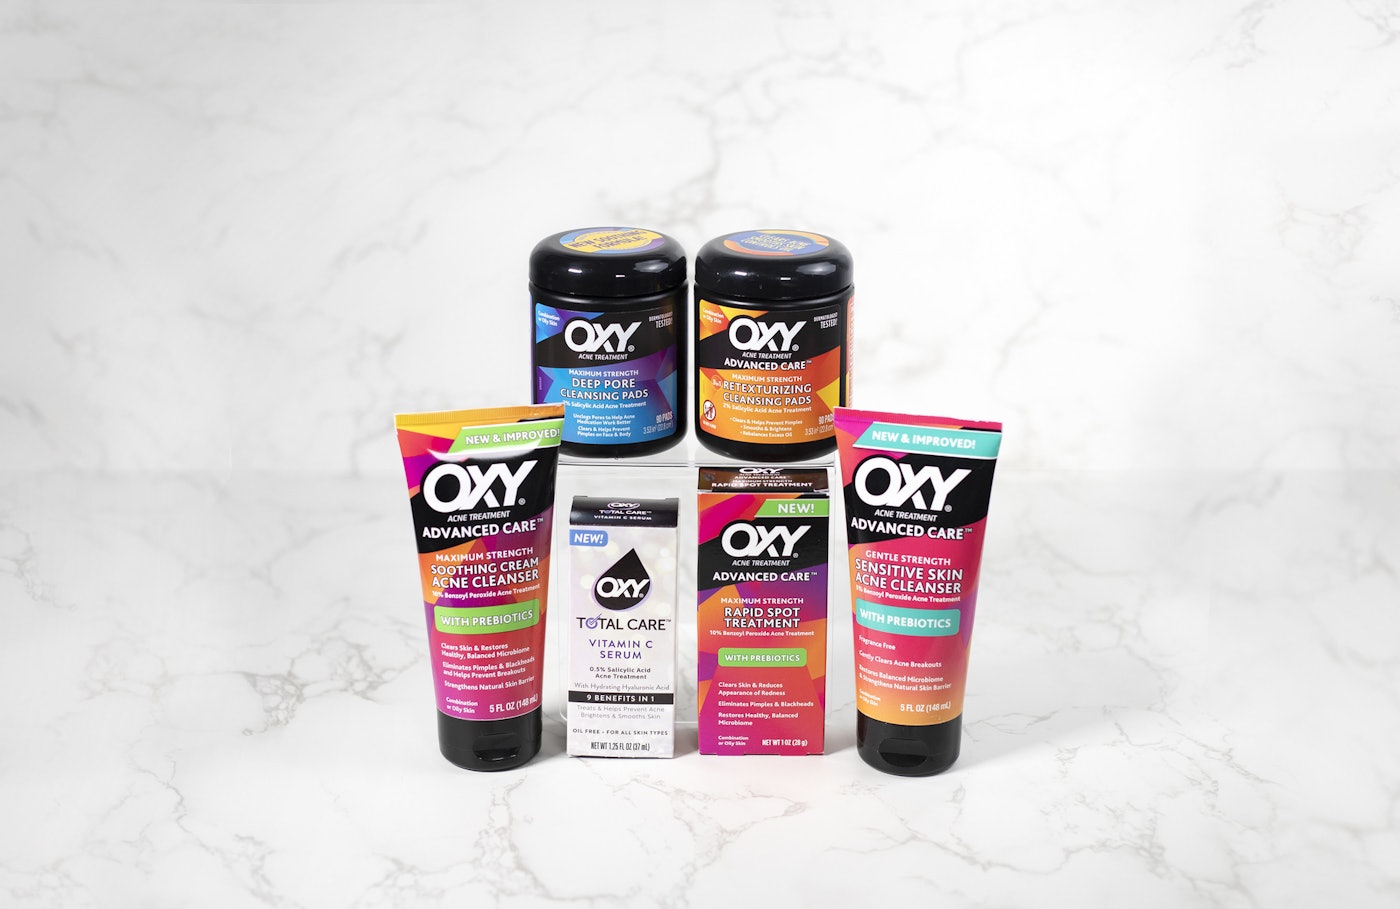 oxy-skin-care-acne-treatments-now-dermatologist-recommended-global